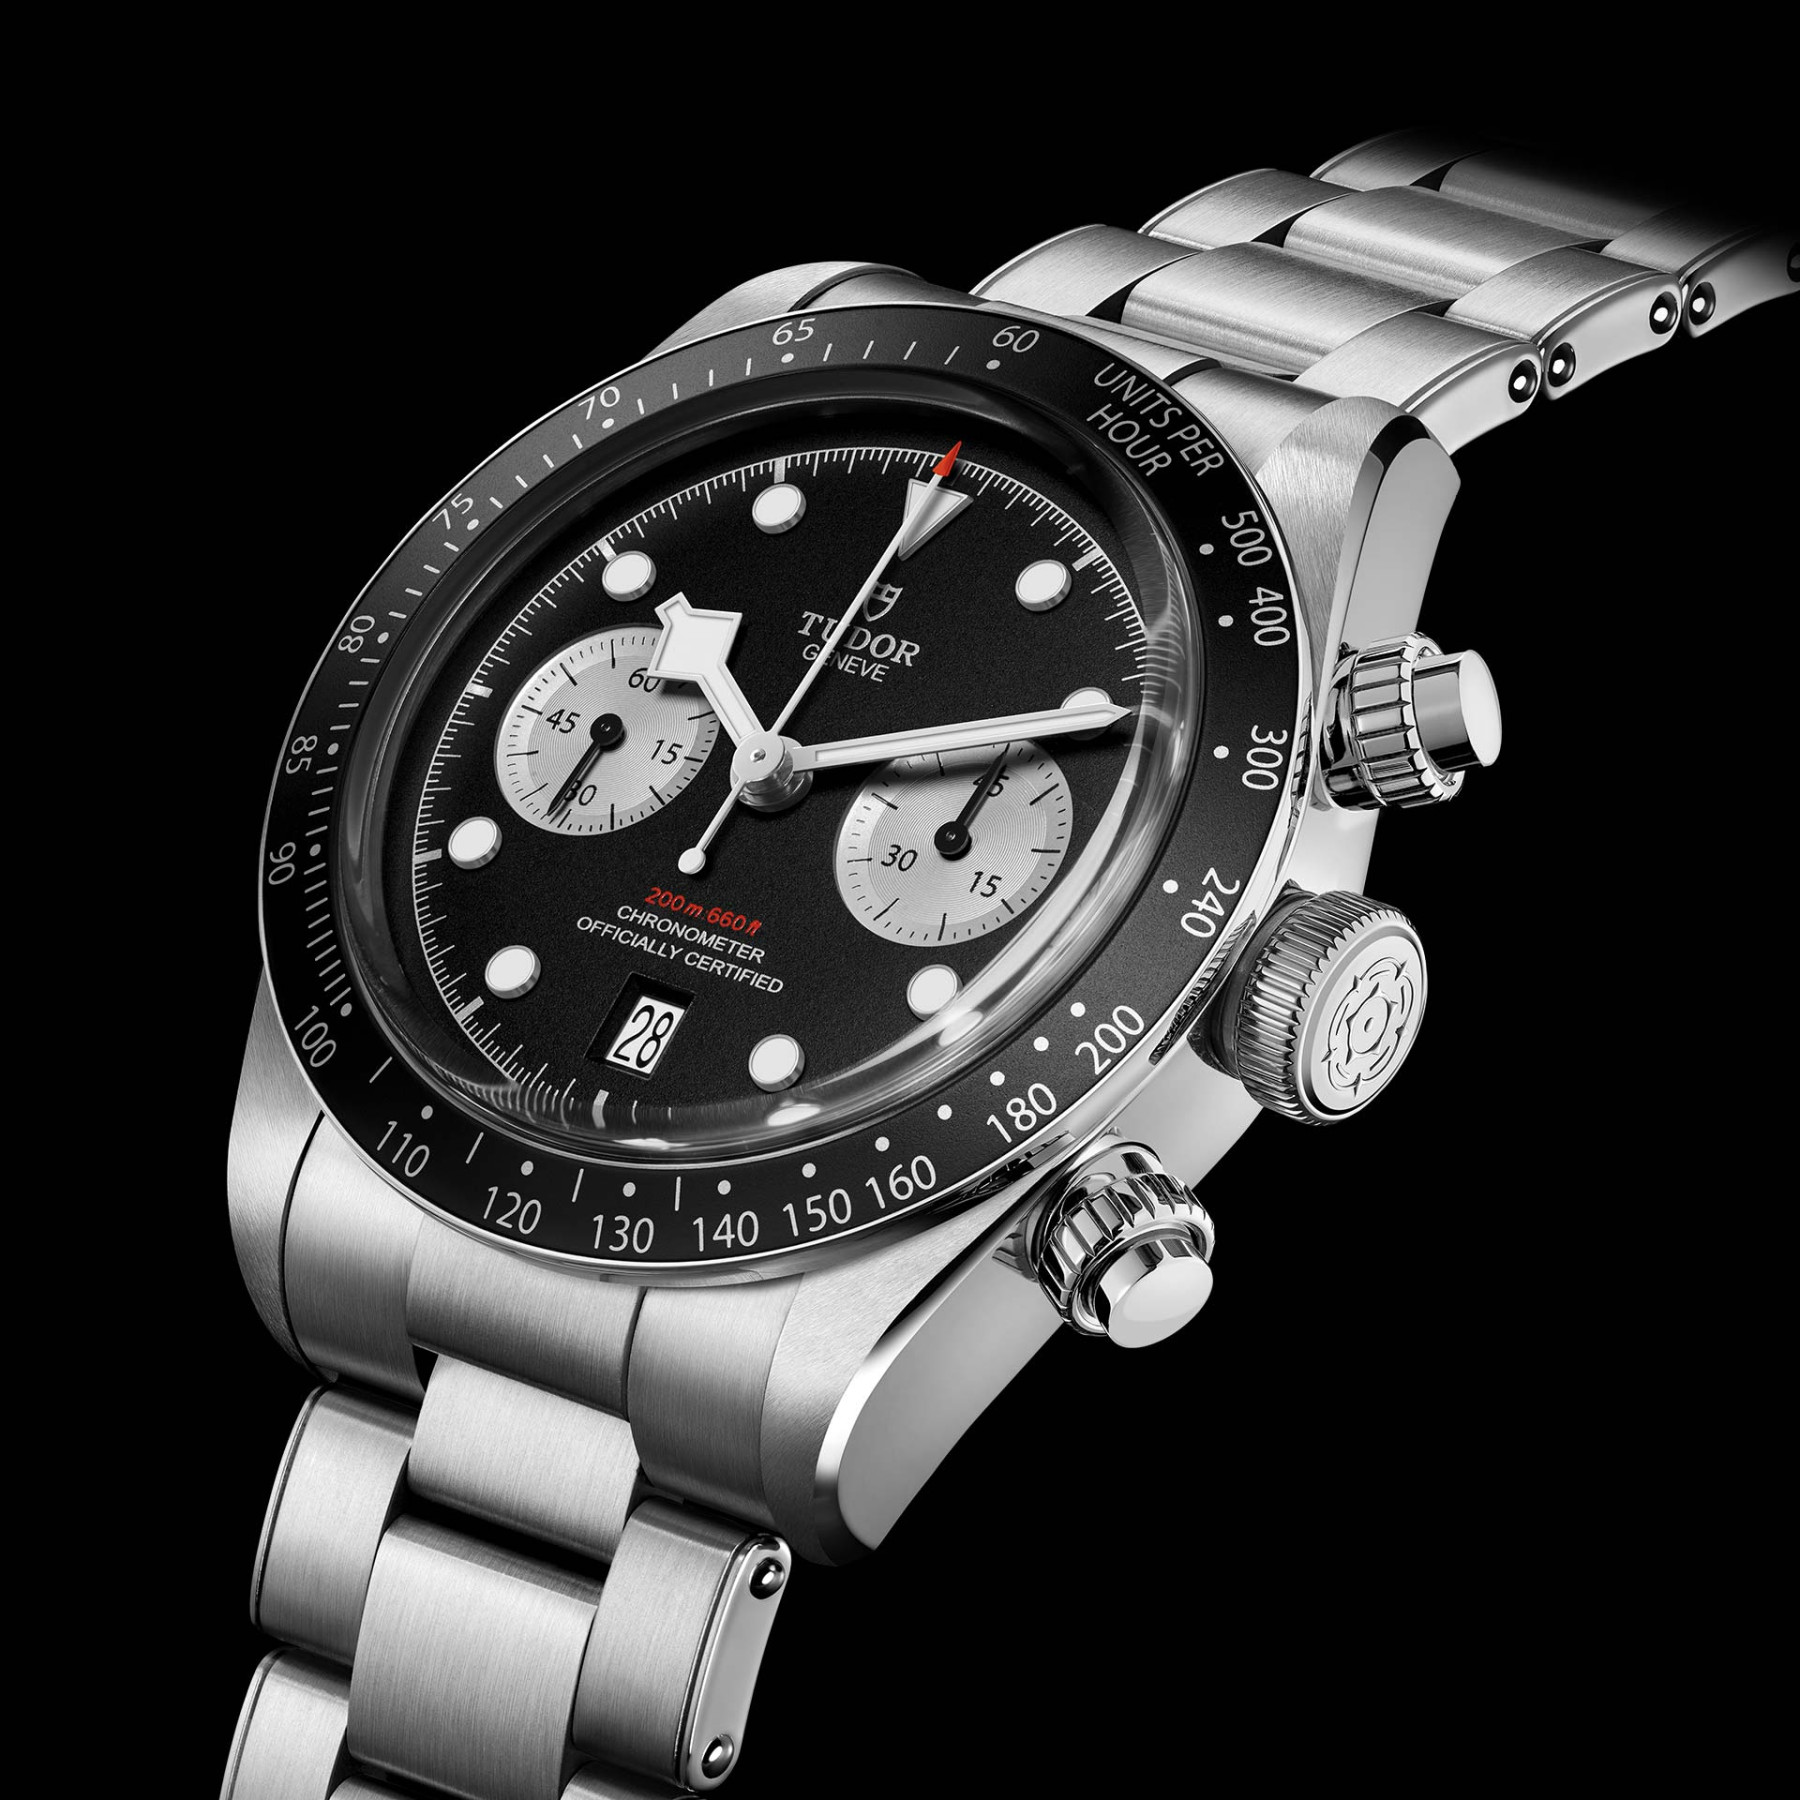 TUDOR Black Bay Chrono with Black Bezel and Black Dial - 41mm M79360N-0001 Watch Front